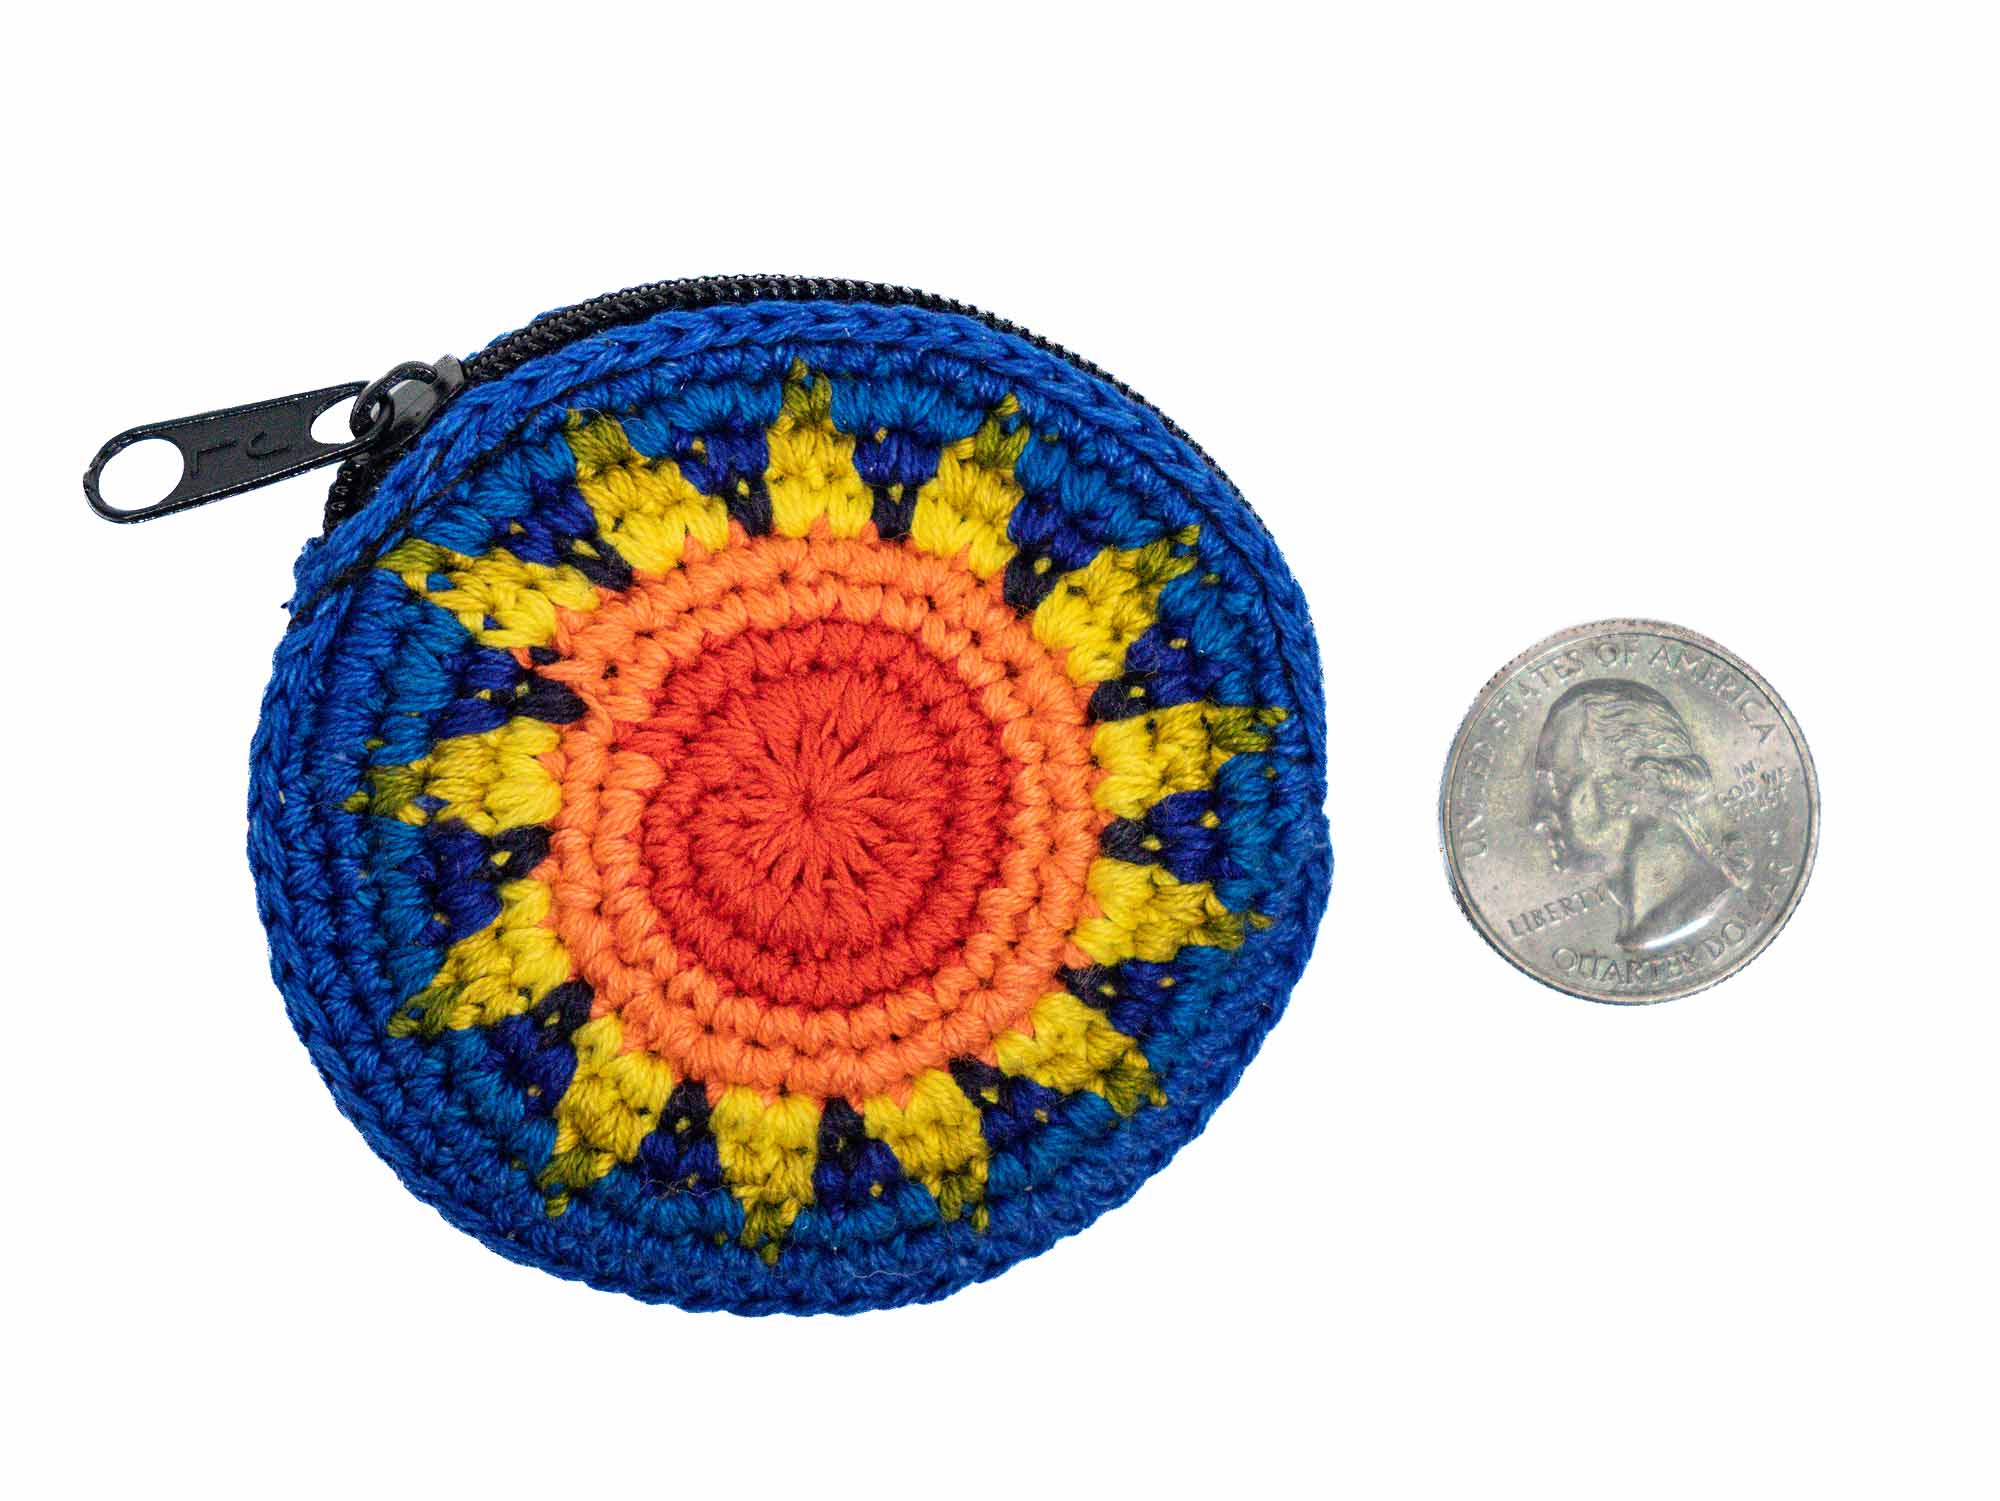 Easy beginner friendly Crochet Coin Purse Tutorial: Step-by-Step Guide by  RadCrochet - YouTube